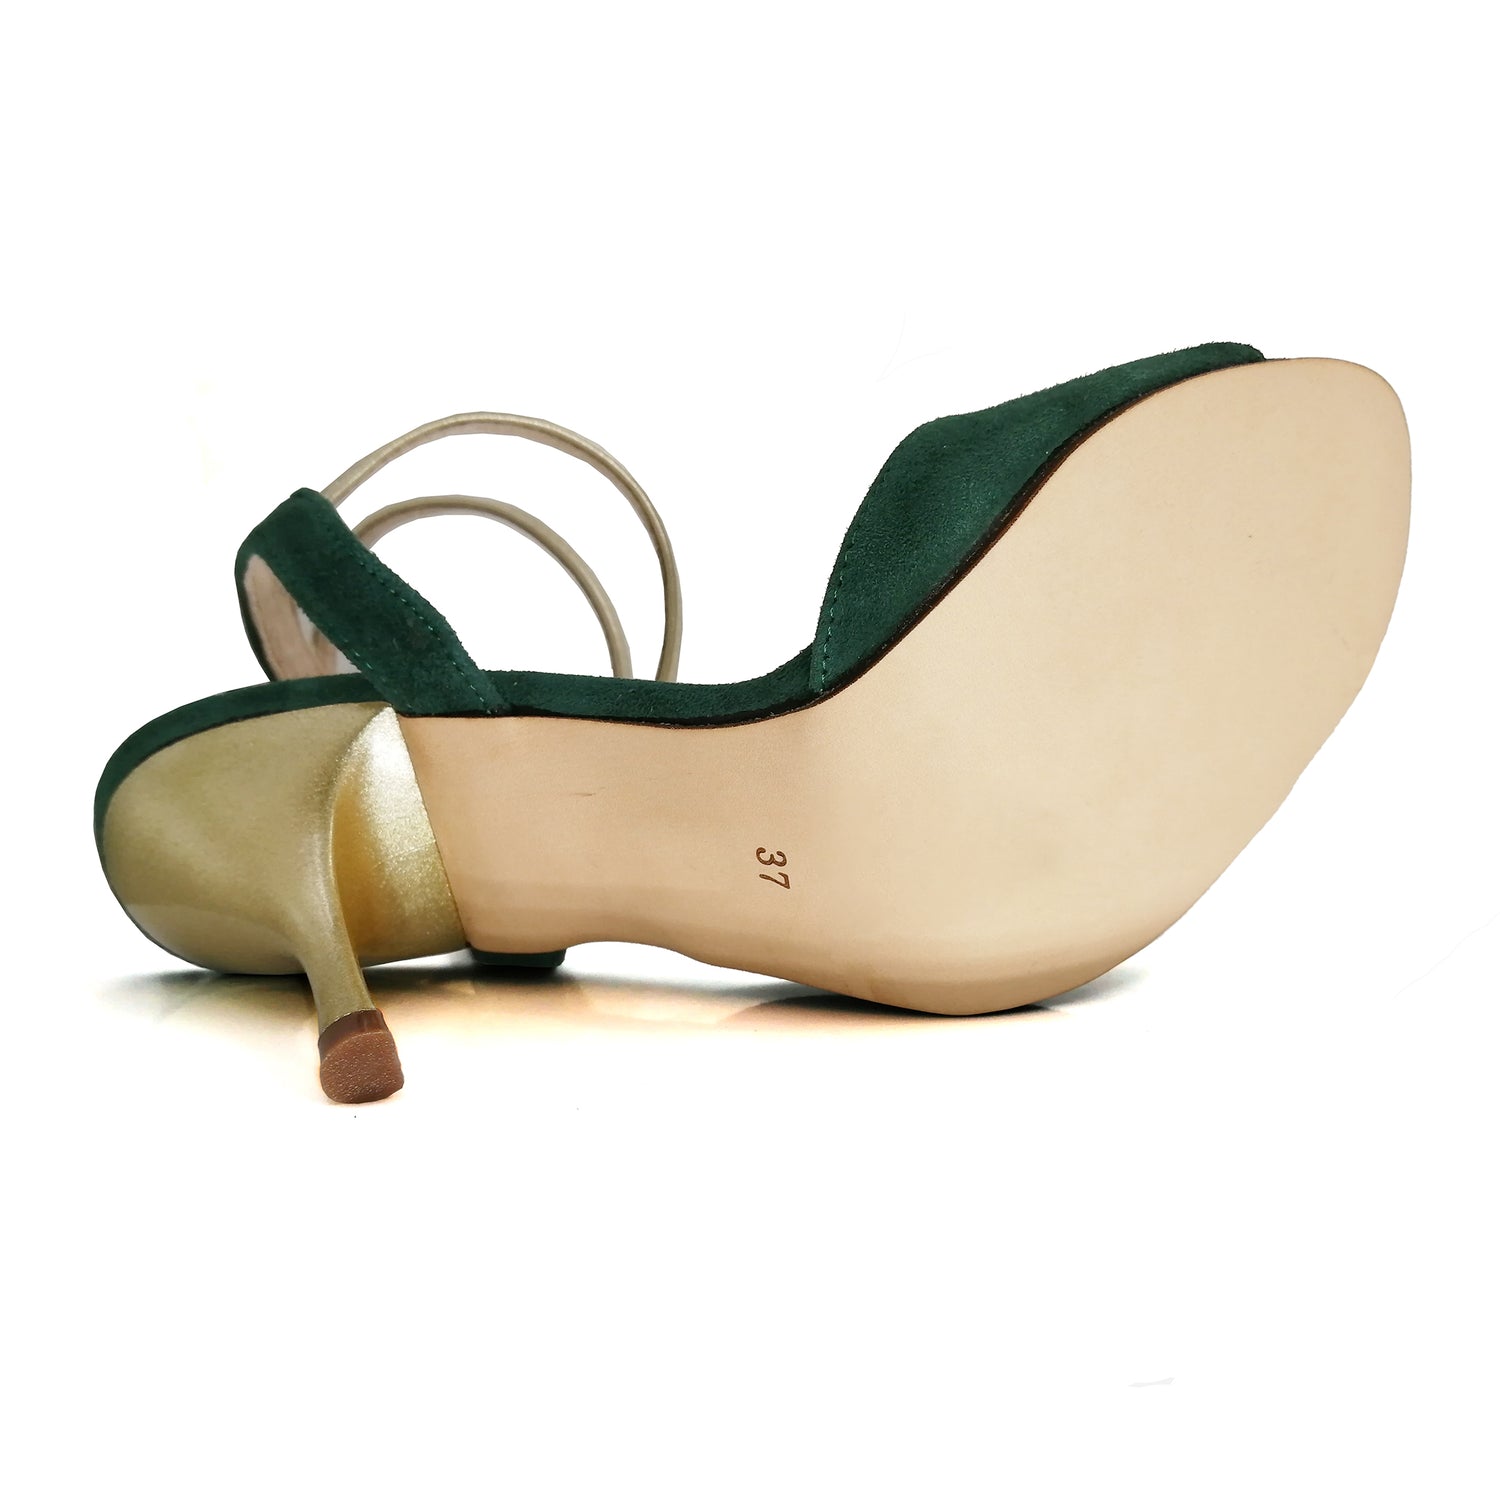 Pro Dancer Argentine Tango Shoes with Leather Sole and Dark Green Heels3